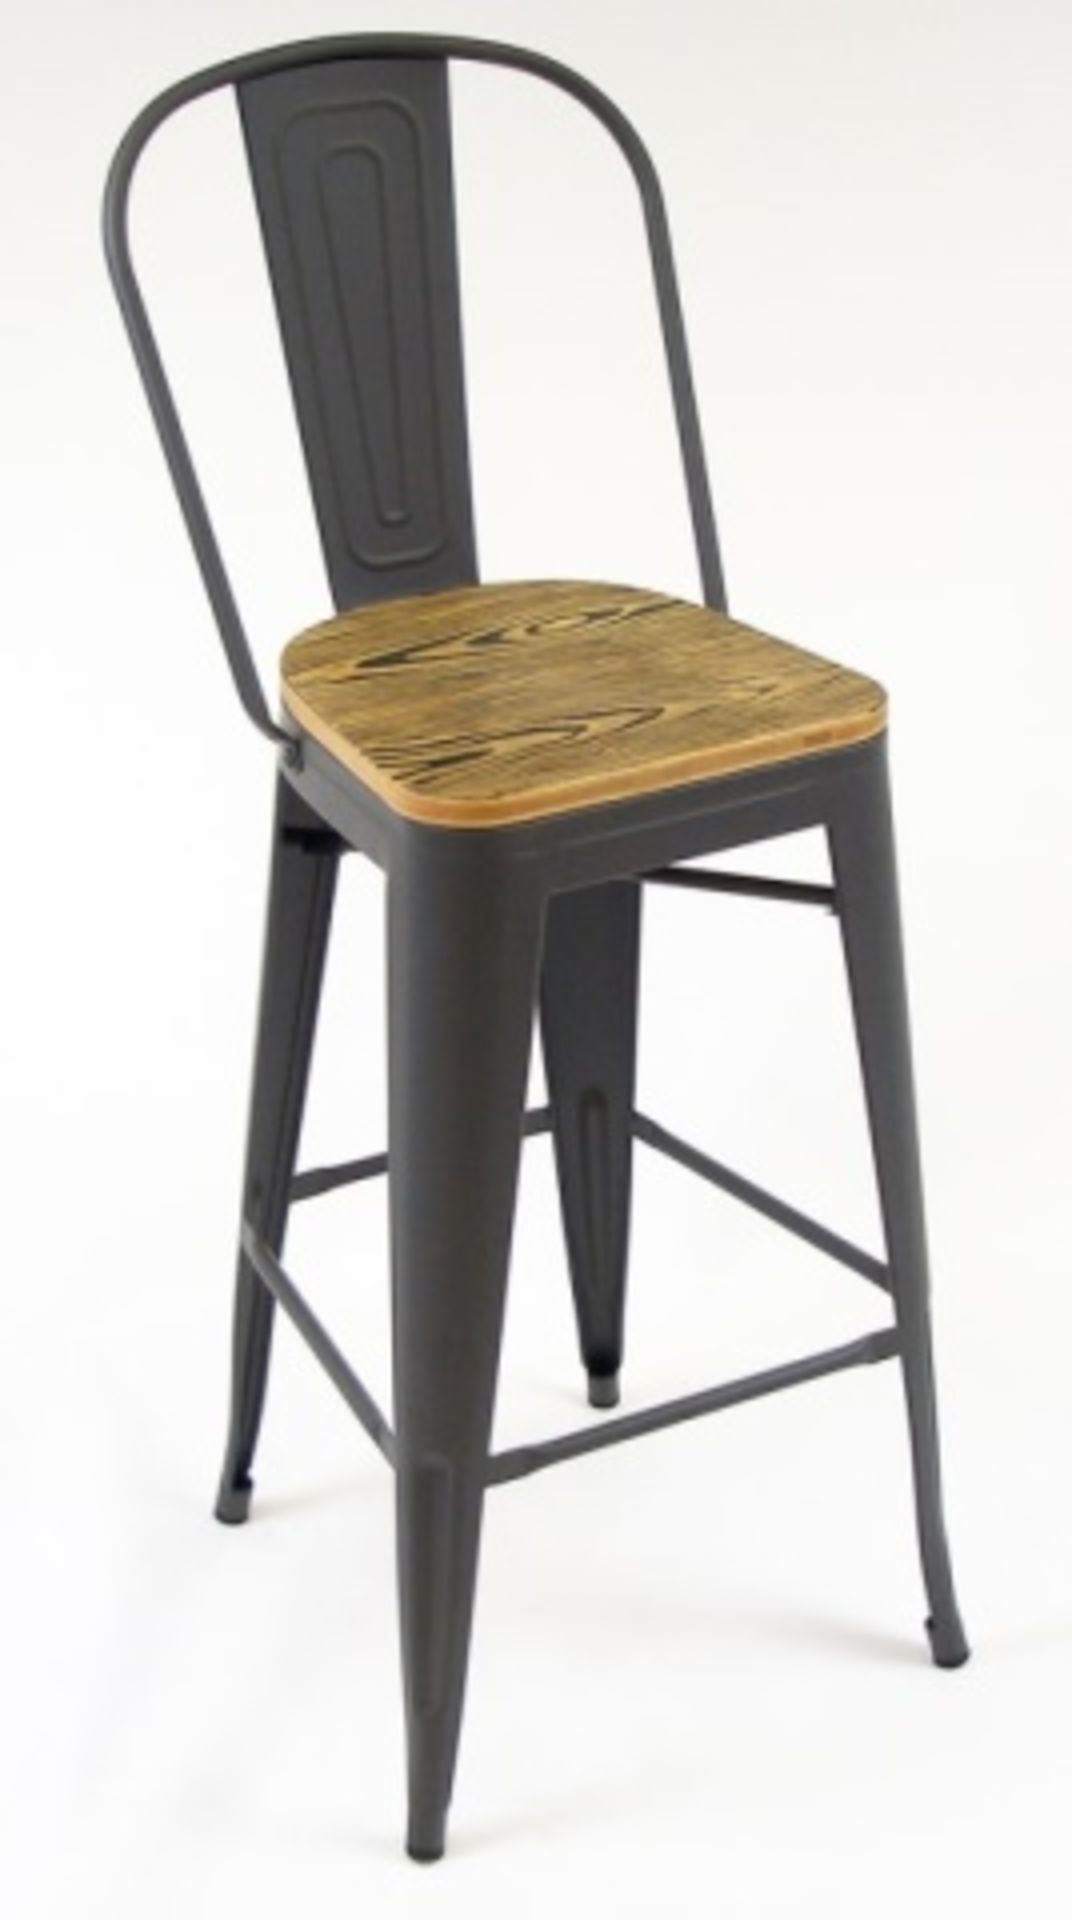 Manhattan Barstool With Back - Wood/Gray, T-5852-4. Powder Coat finish on e-coated steel, or clear